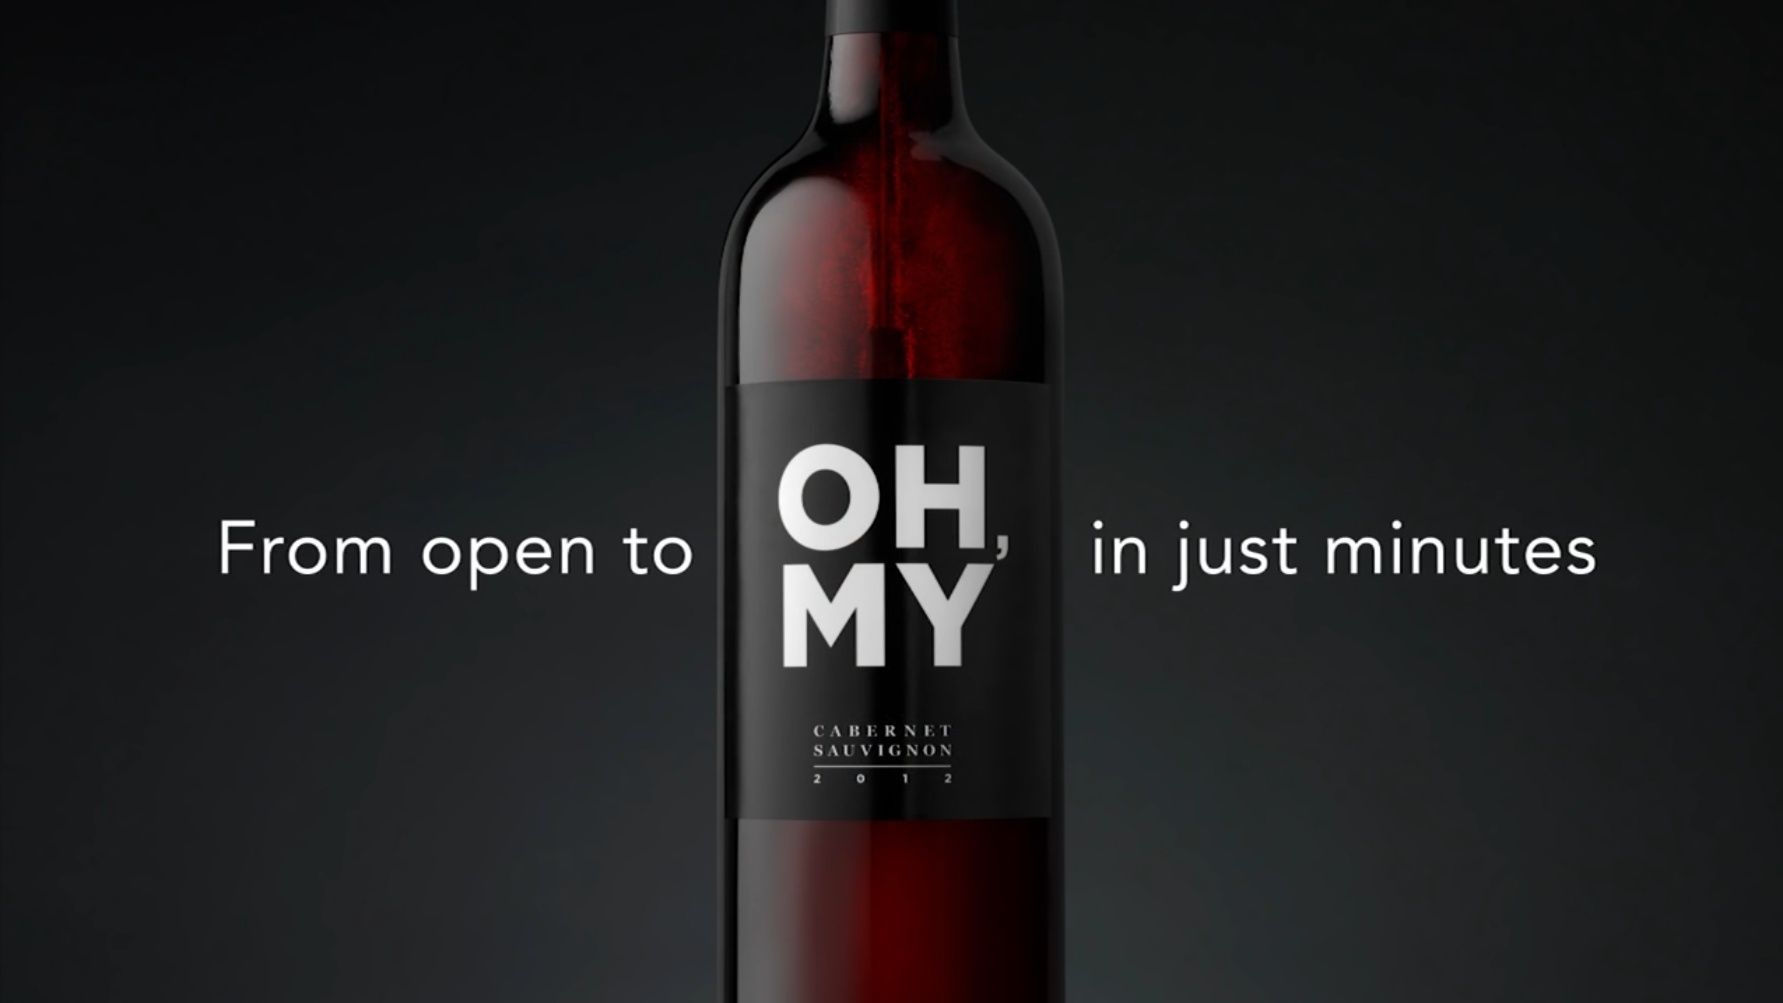 Wine bottle on a black background, inscription: From open to Oh my in just minutes